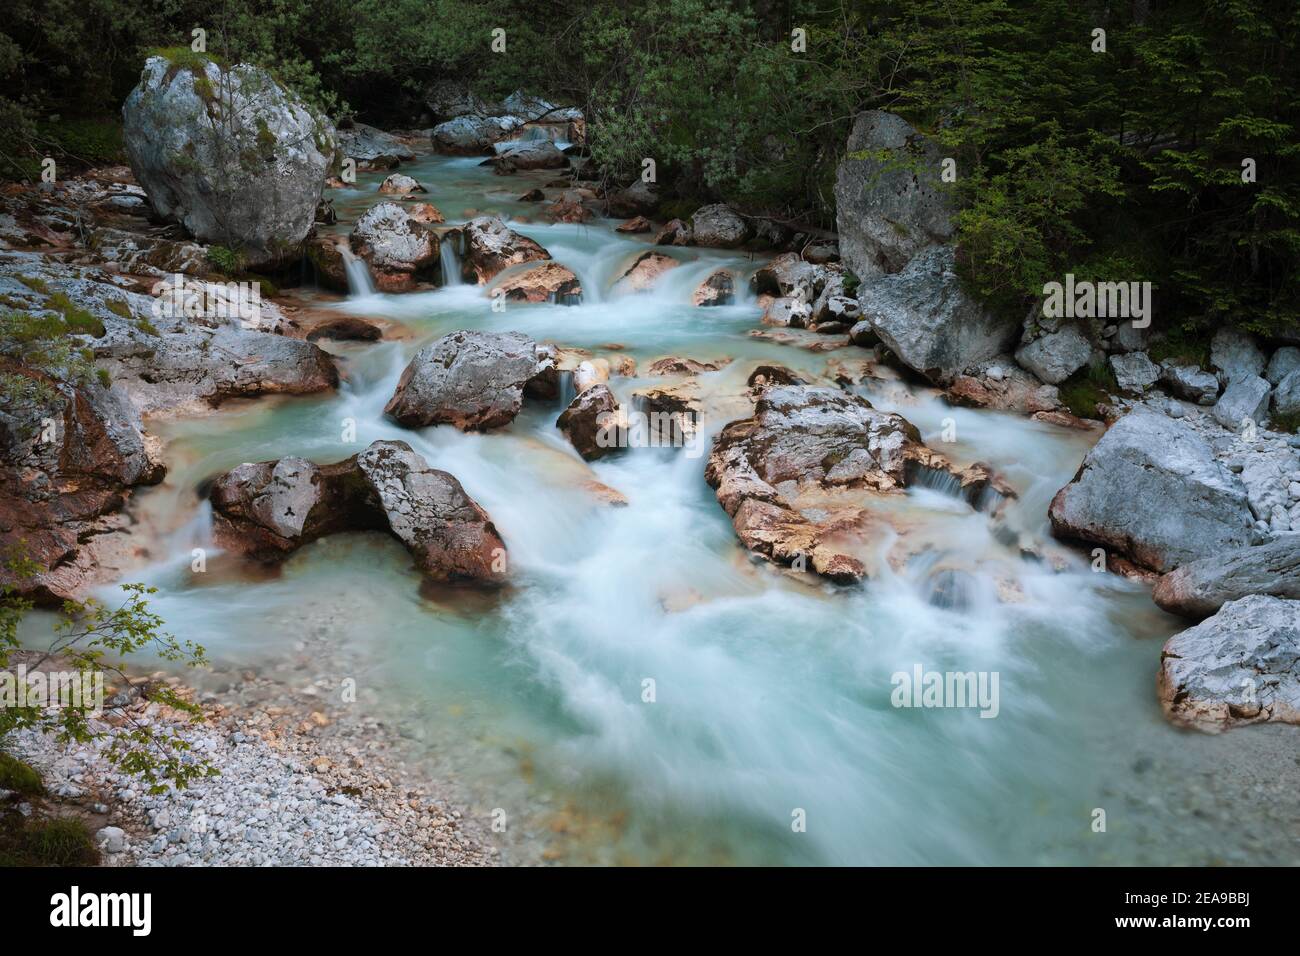 The emerald river Soča in its upper course with numerous rapids and rocks in the riverbed Stock Photo